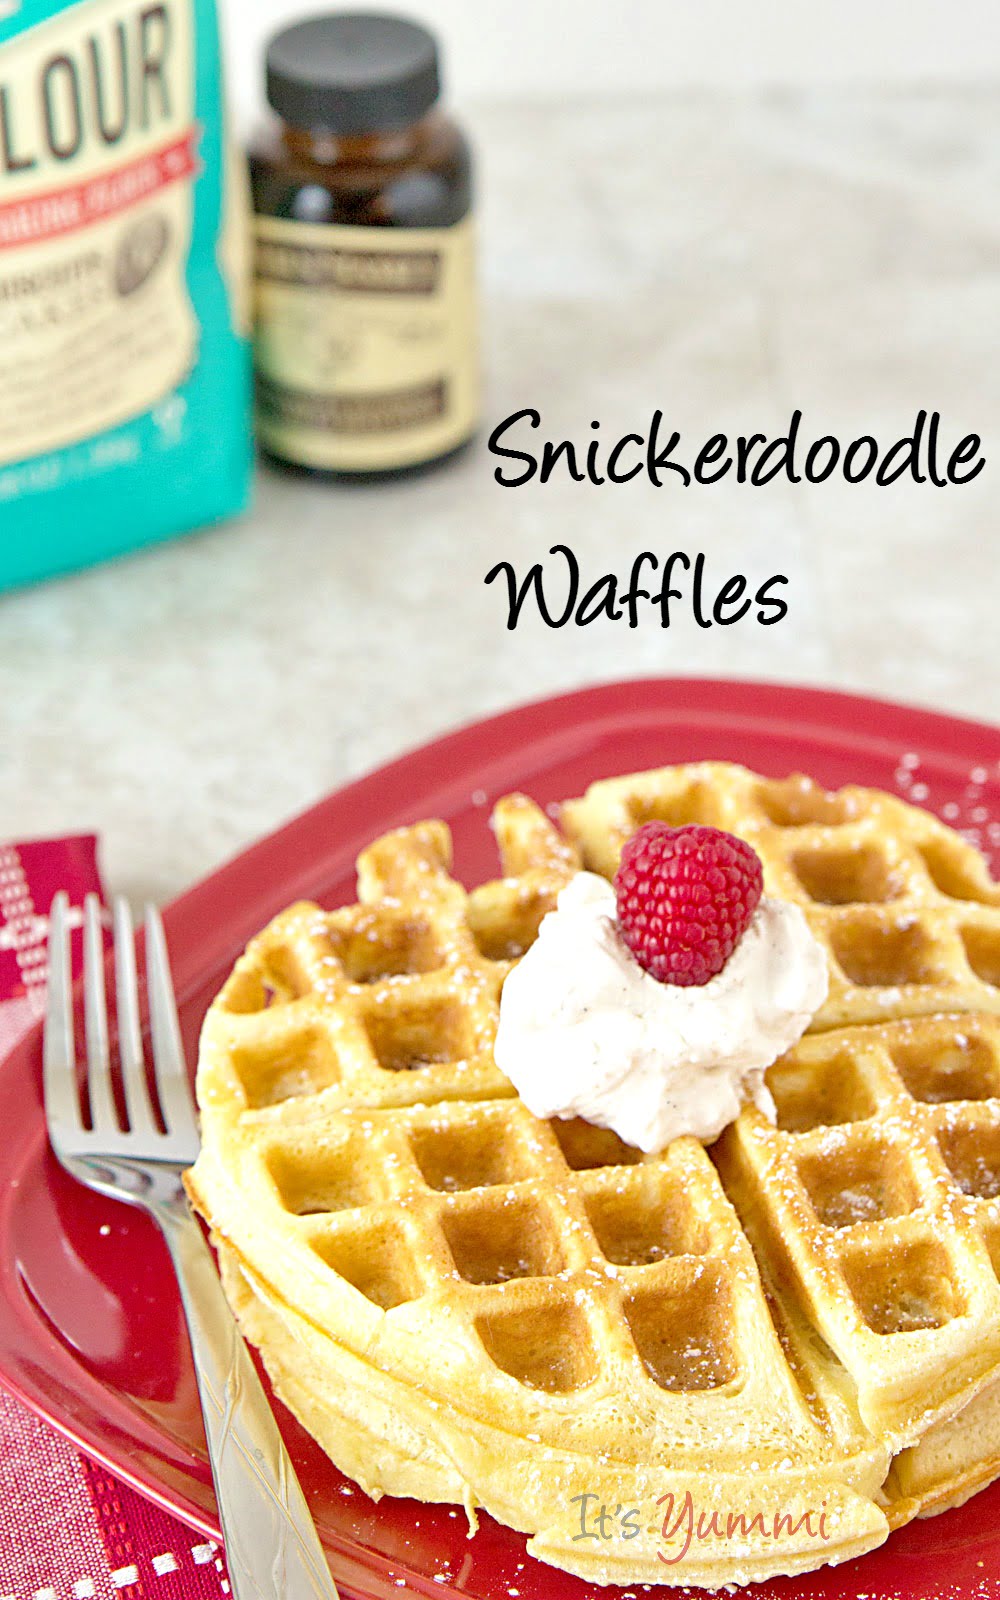 If you enjoy snickerdoodle cookies, you'll love this snickerdoodle waffles recipe! It's another one of those easy waffles recipe ideas that can be made quickly for a weekend breakfast or brunch! #vanillaweek